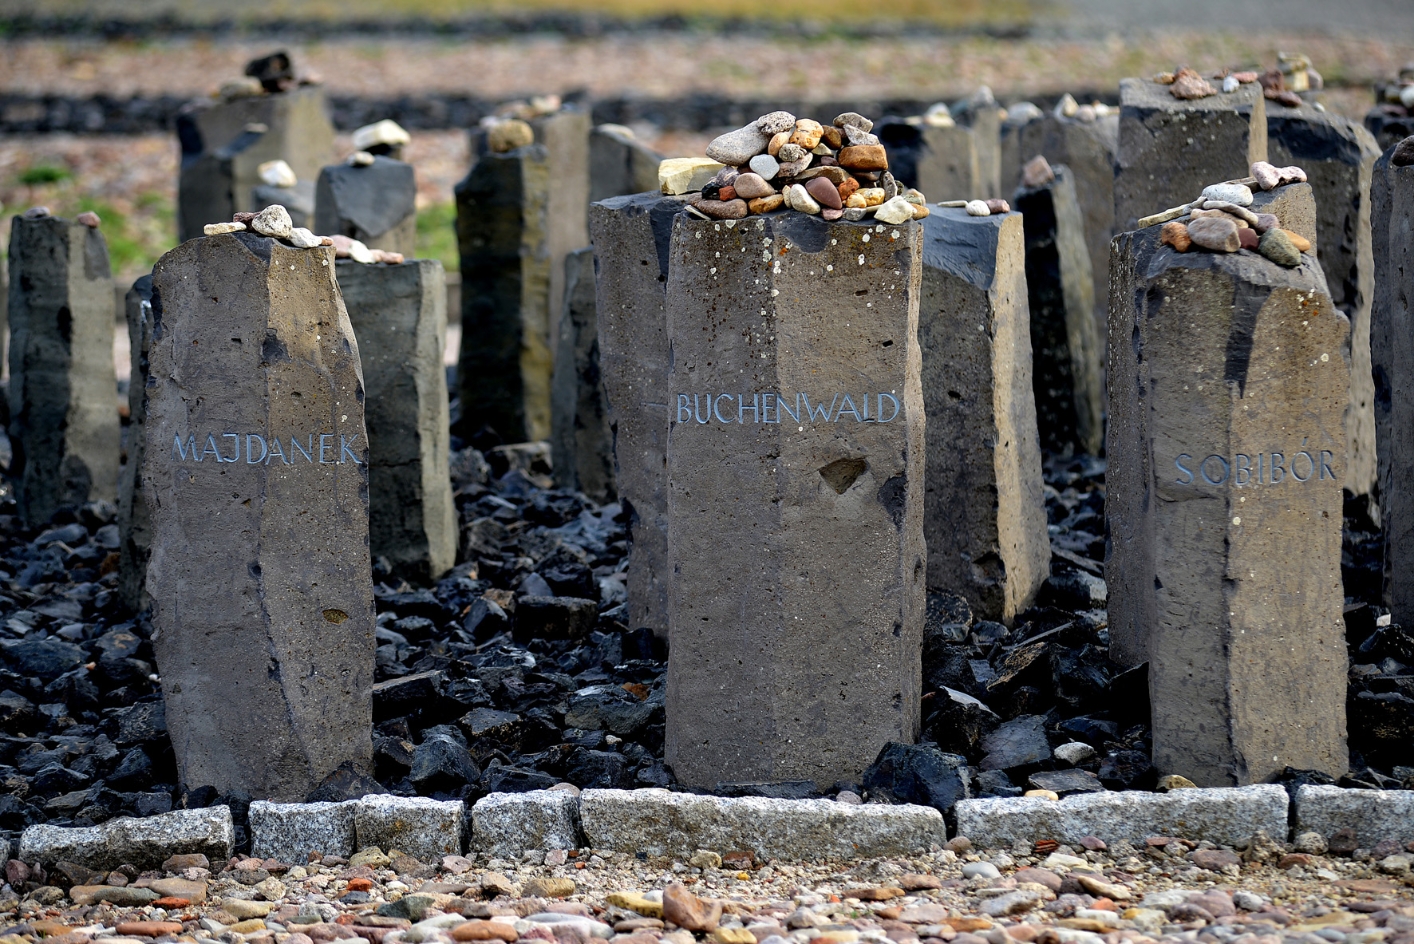 Columnar, waist-high stones set in a black siltstone field. On the top of the stones were deposited sporadically small stones. The three stone columns in focus are engraved:. Left: "Majdanek", center: "Buchenwald". Right: "Soribor".